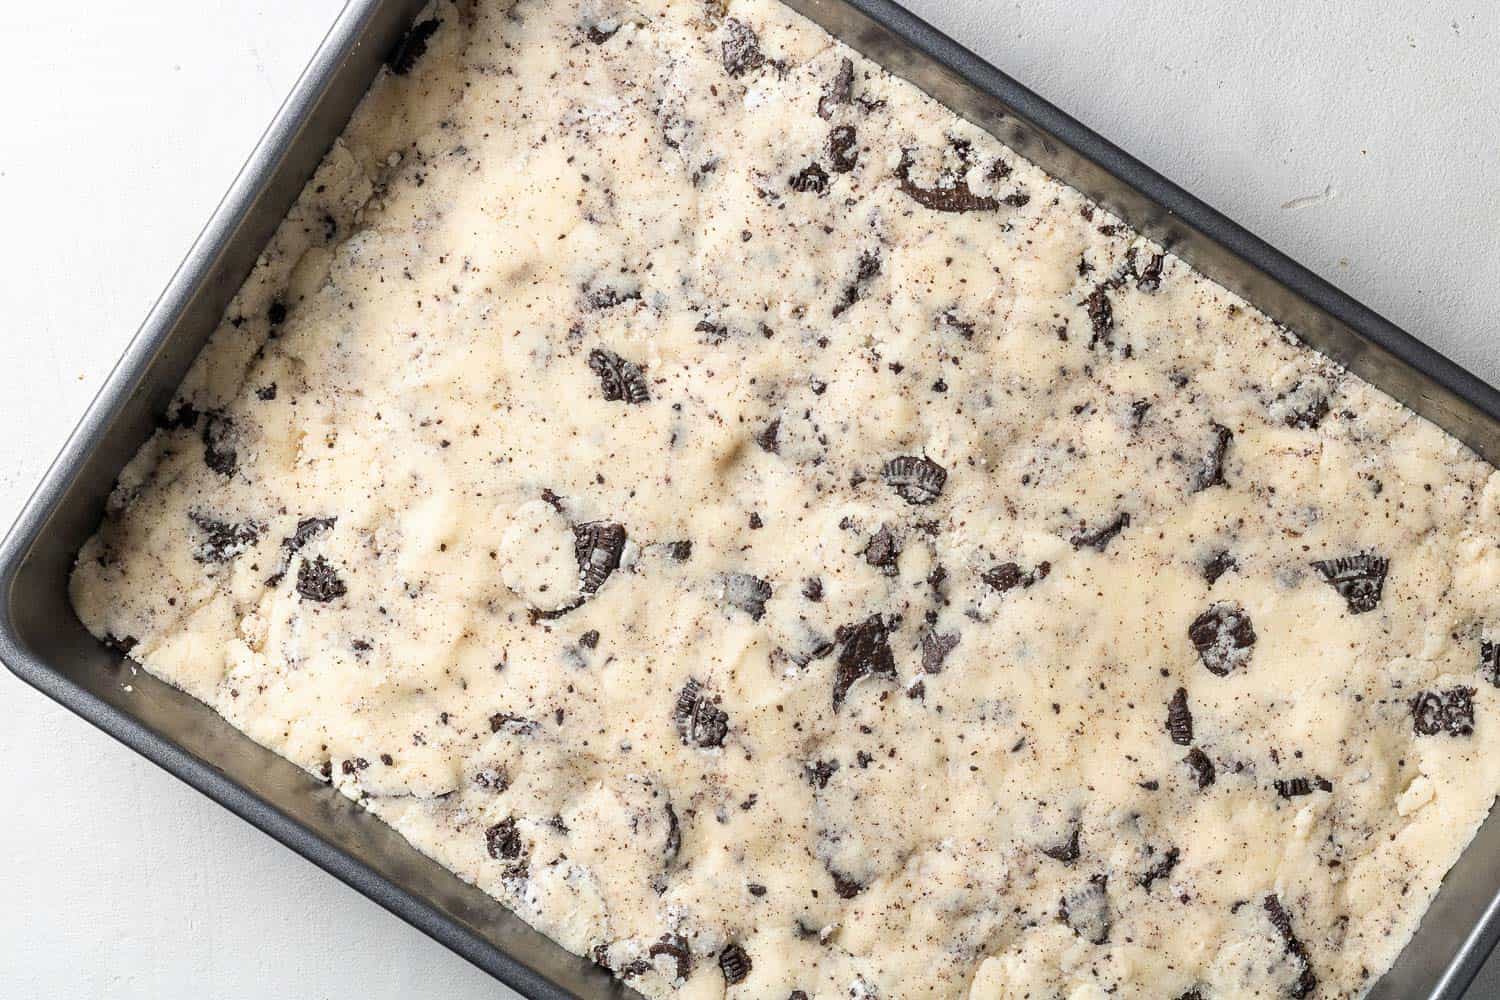 Unbaked cookie dough in a 9x13 baking dish.